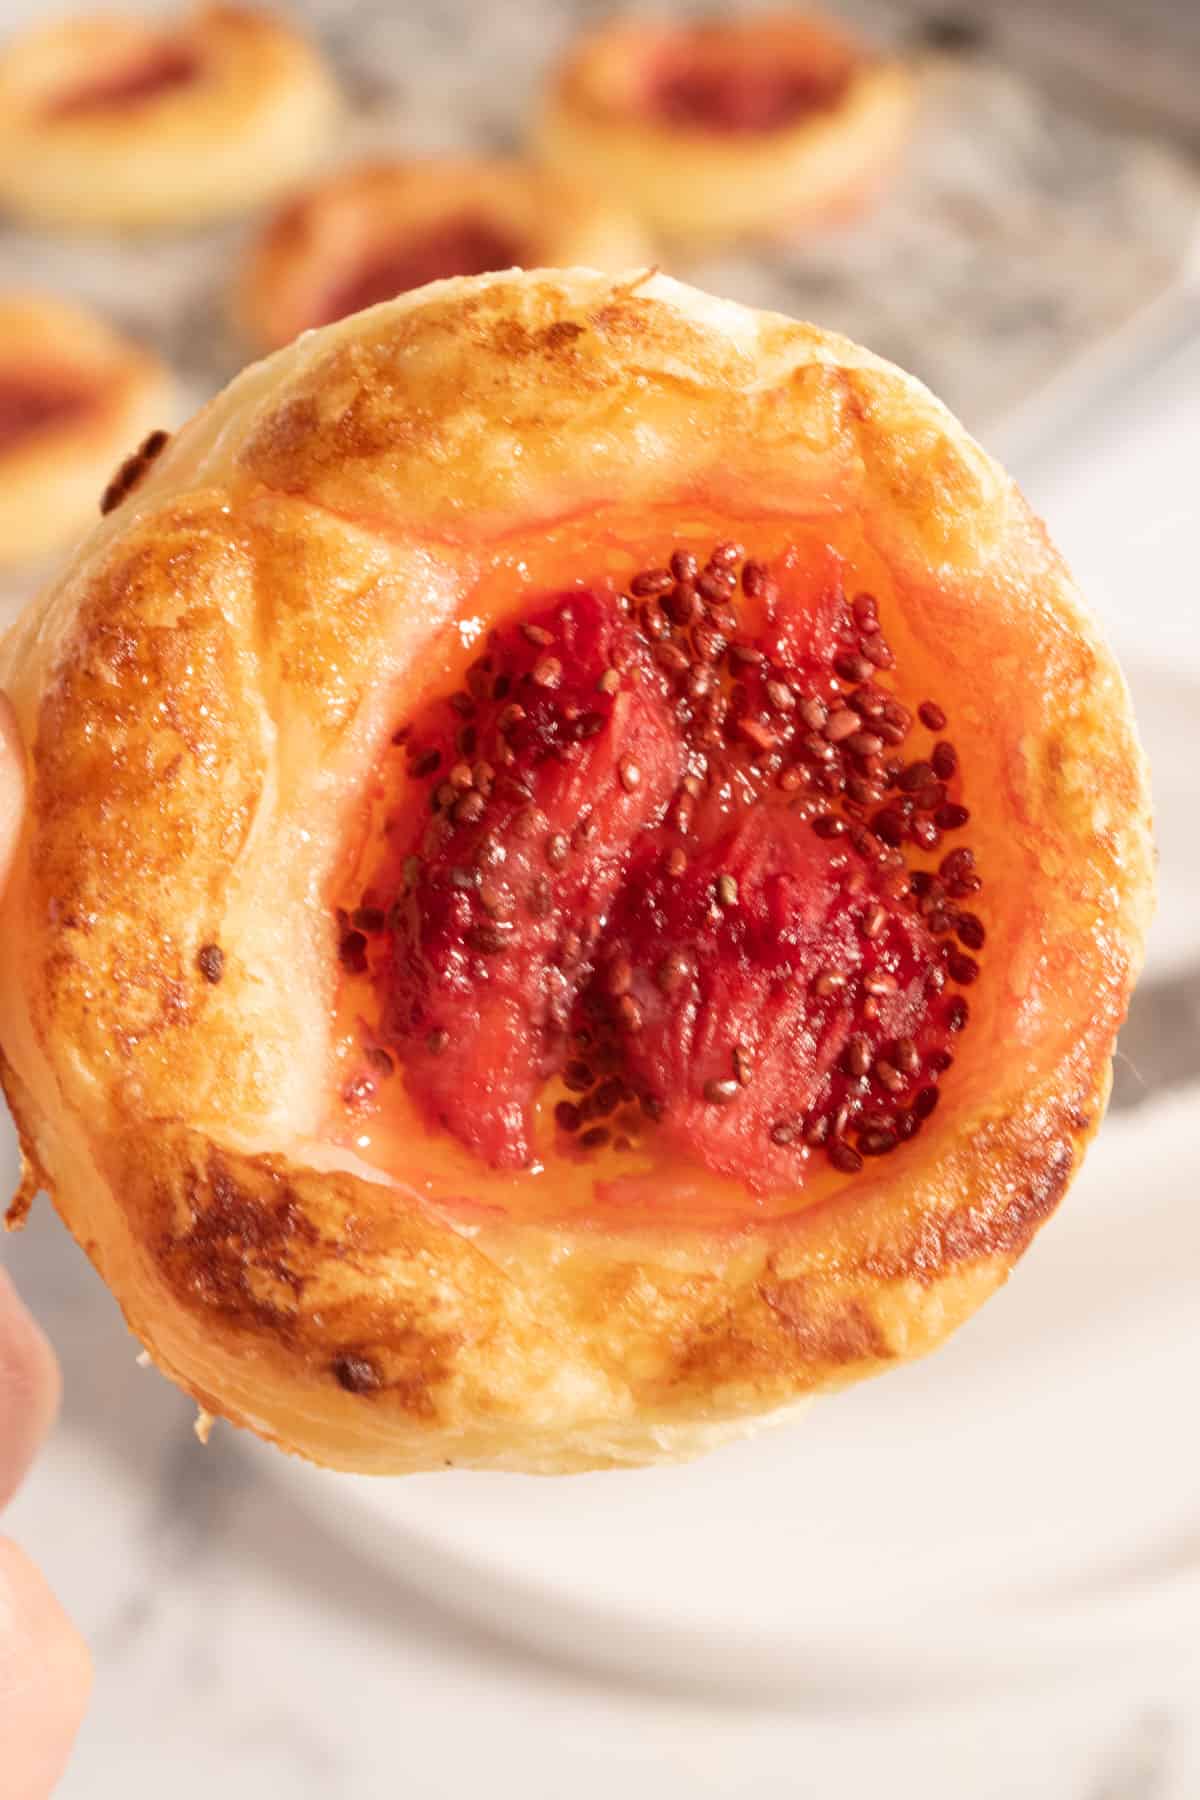 A golden, undecorated pastry which is filled with lots of jam and chia seeds.